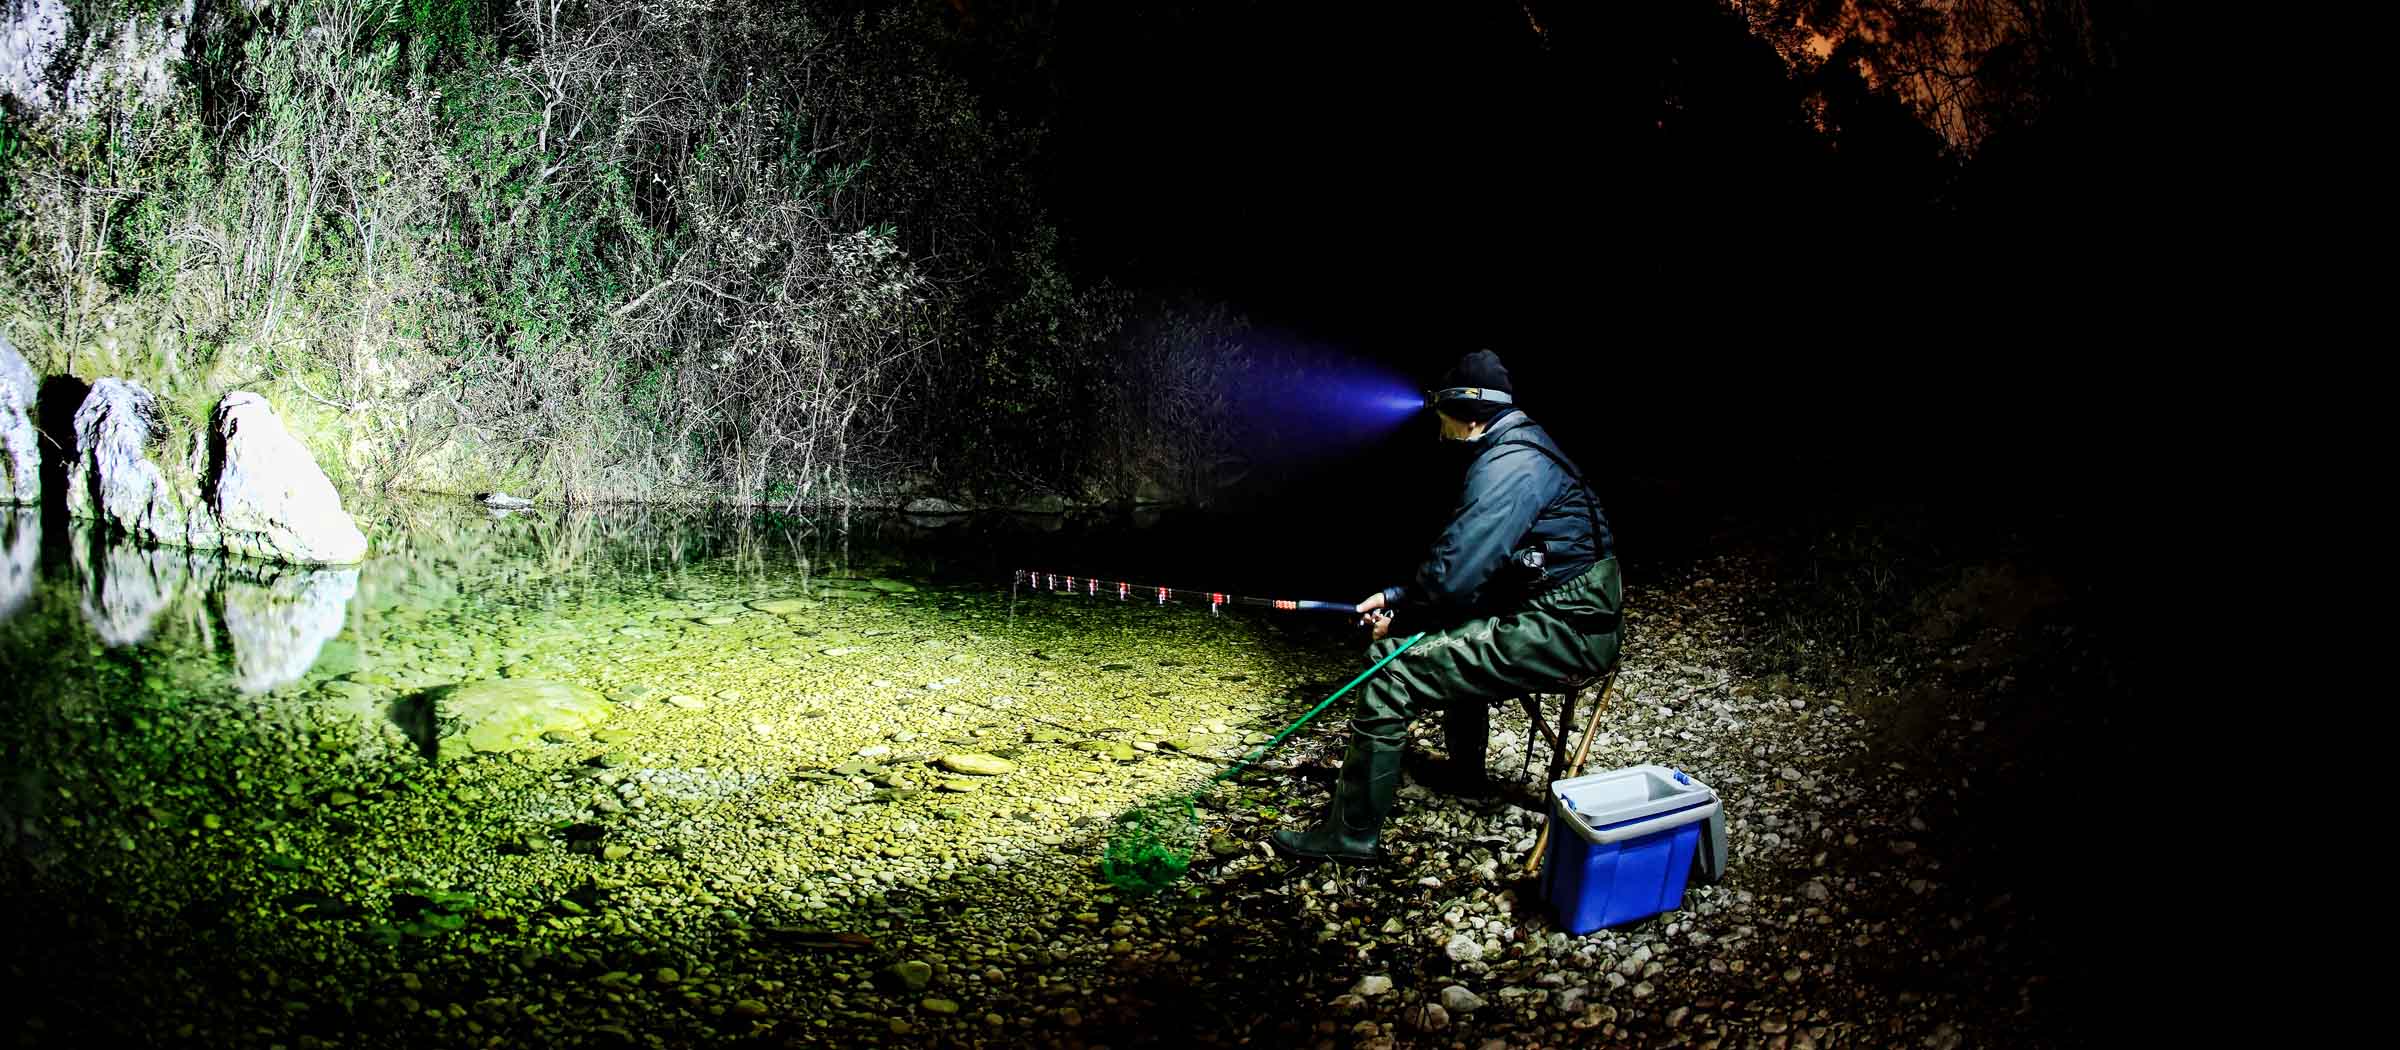 Features To Look for in Your Fishing Light: Best Flashlights and